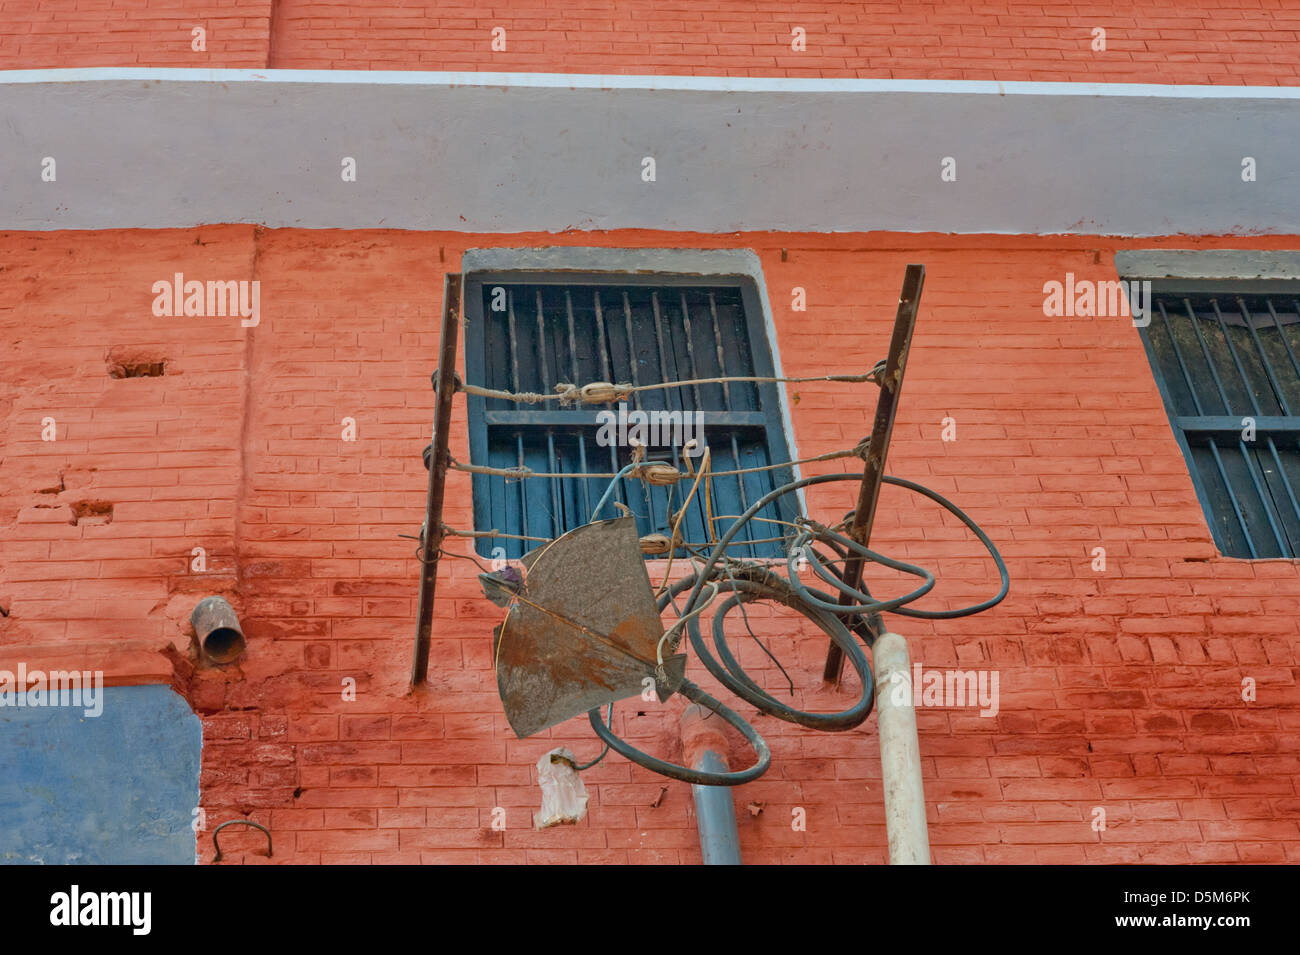 A paper kite caught on the side of a building. India. Stock Photo